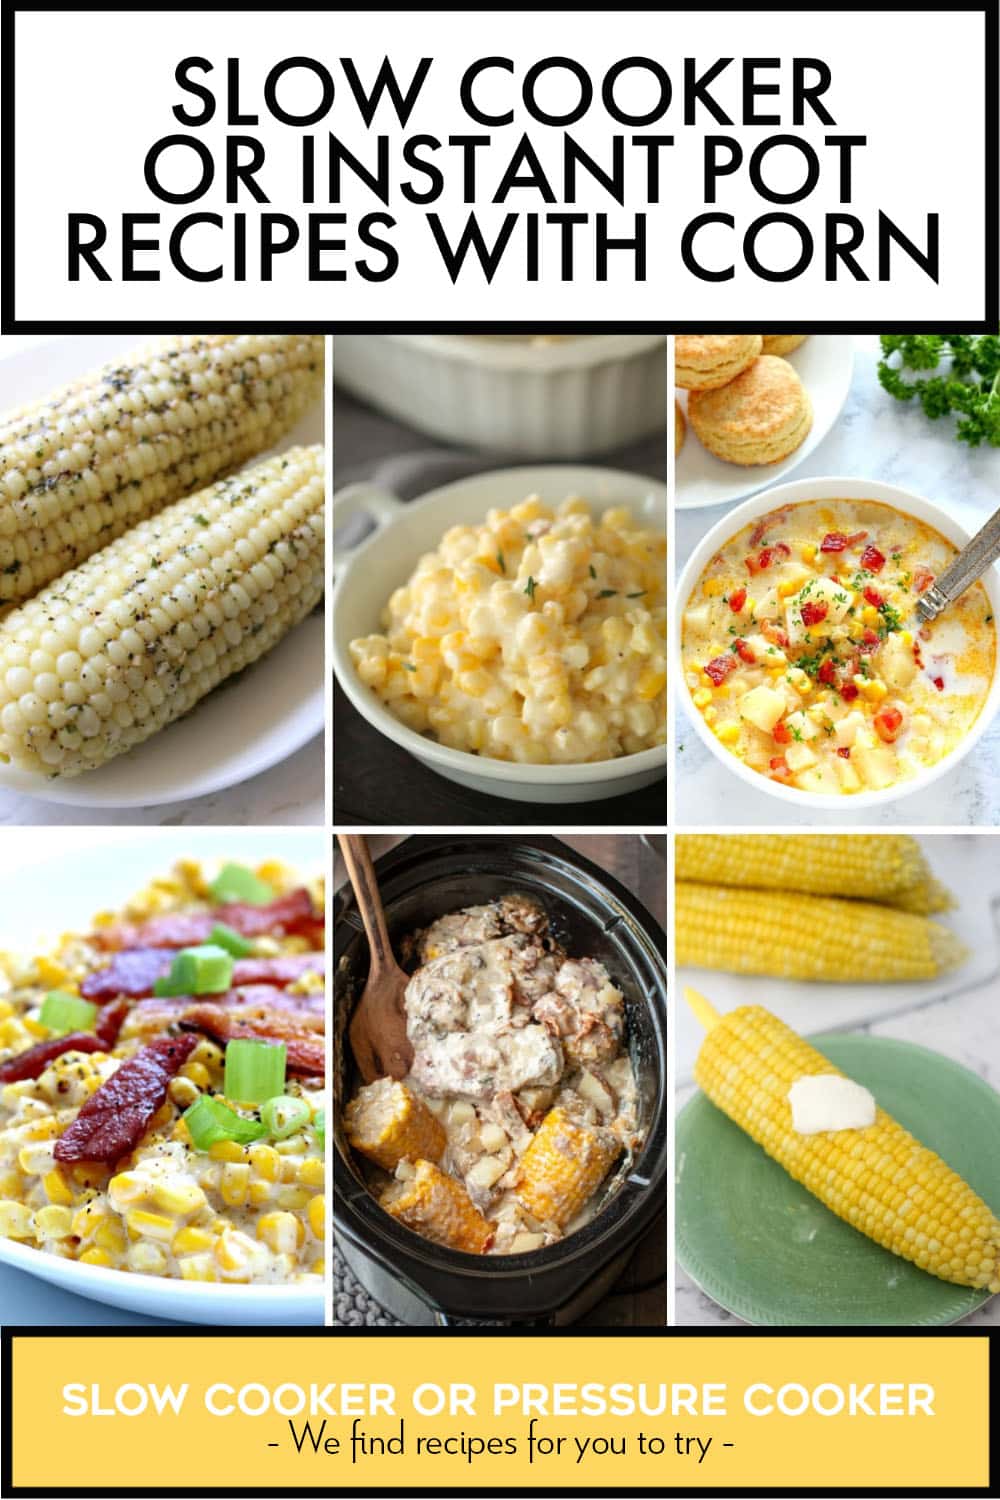 Pinterest image of Slow Cooker or Instant Pot Recipes with Corn